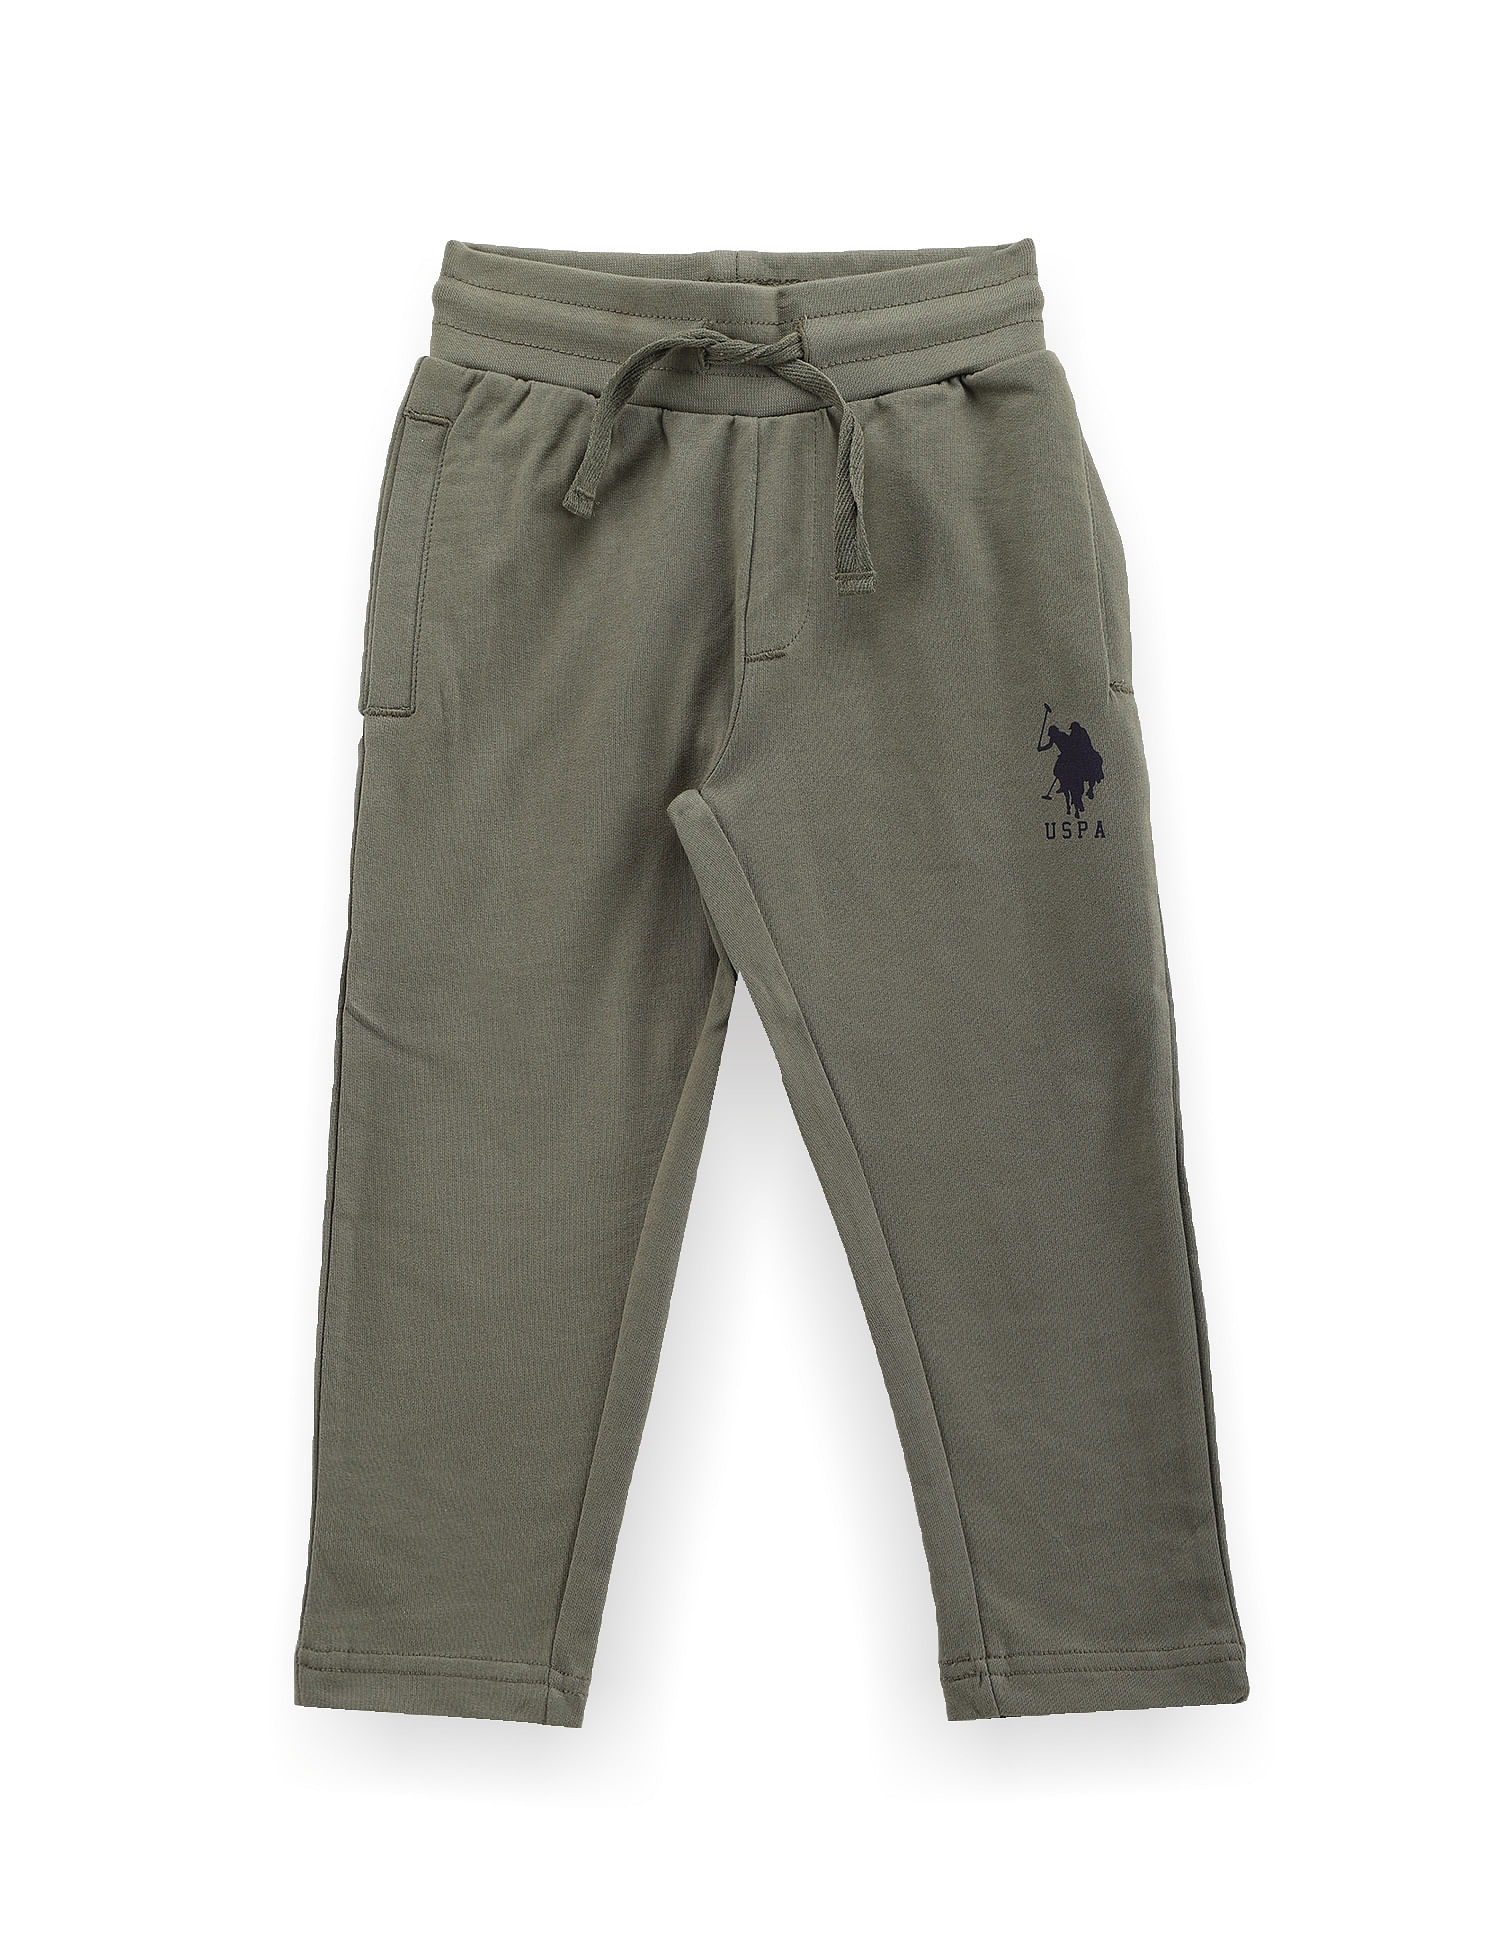 Buy U.S. POLO ASSN. Olive Green Mid Rise Drawstring Waist Track